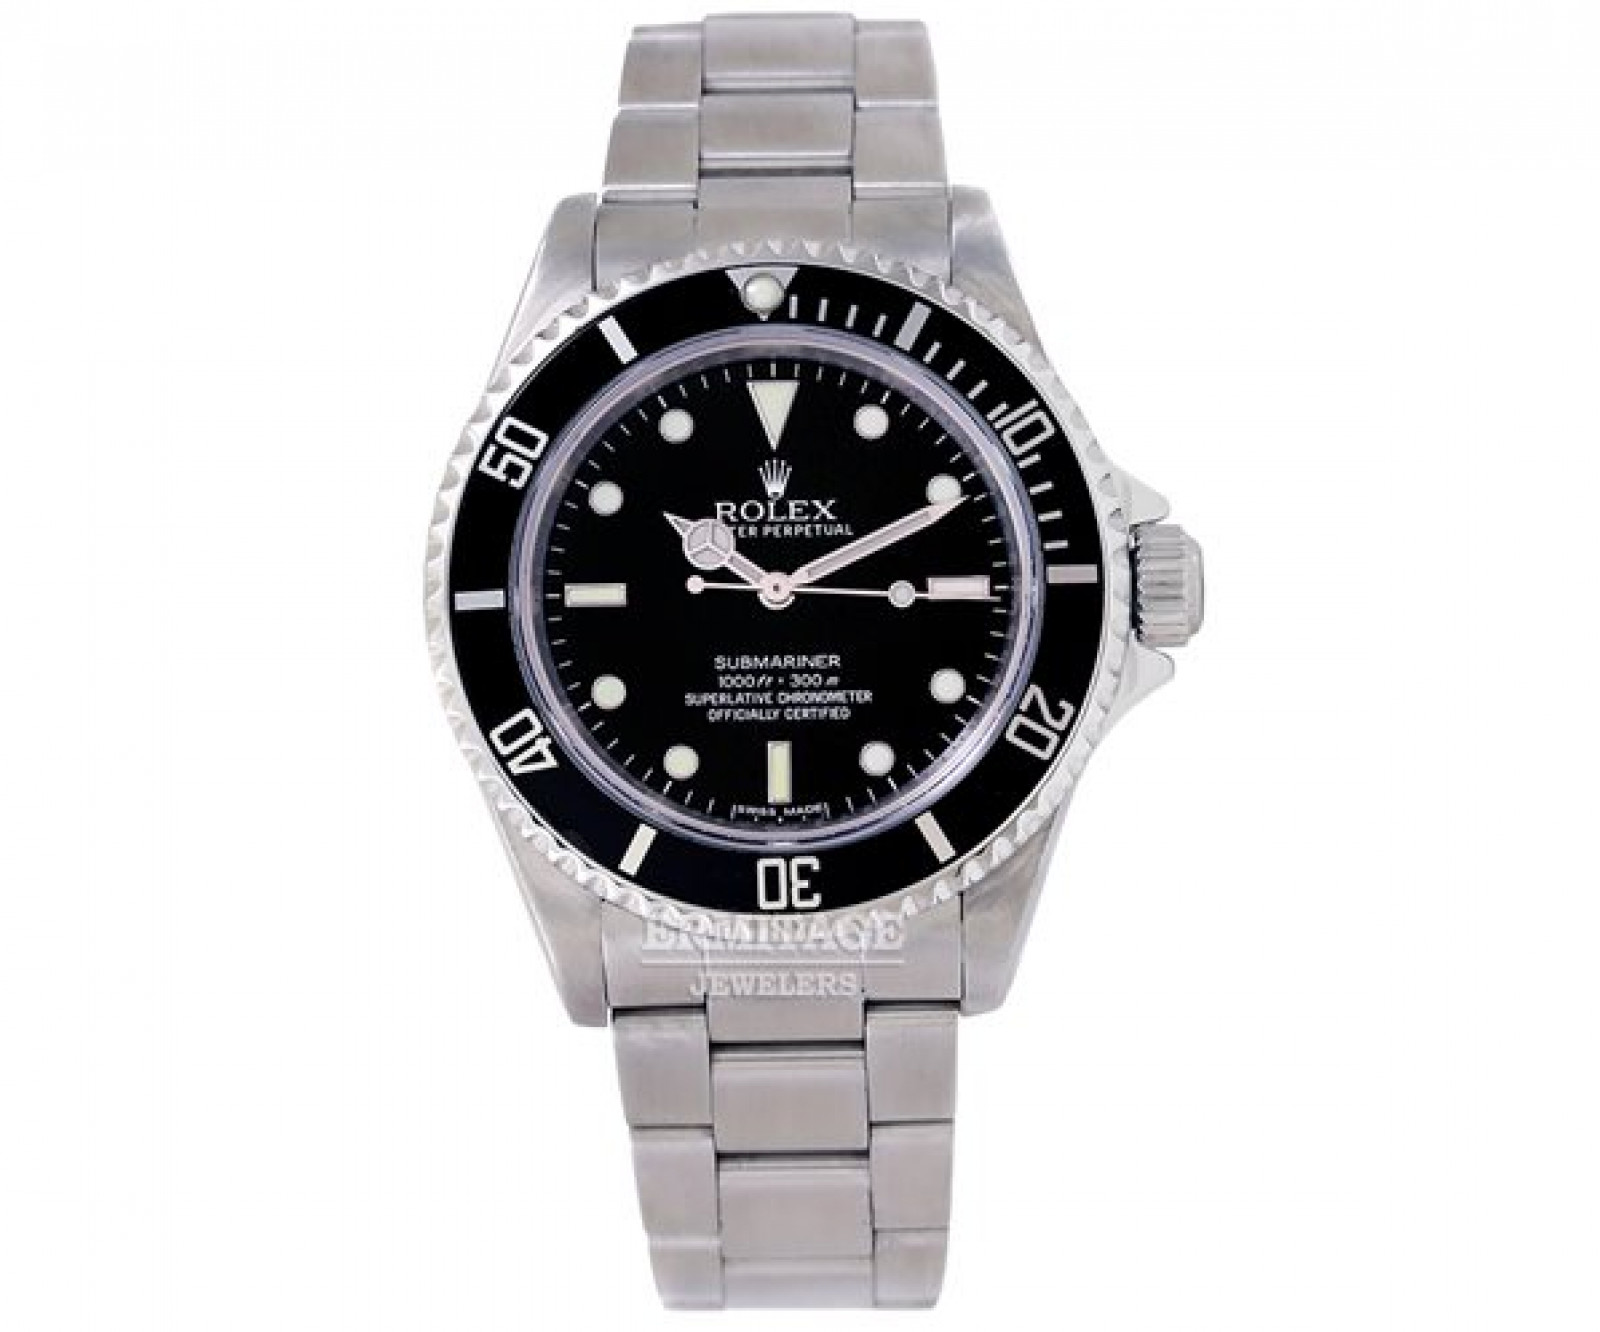 Pre-Owned Submariner 14060M Year 2012 | Jewelers